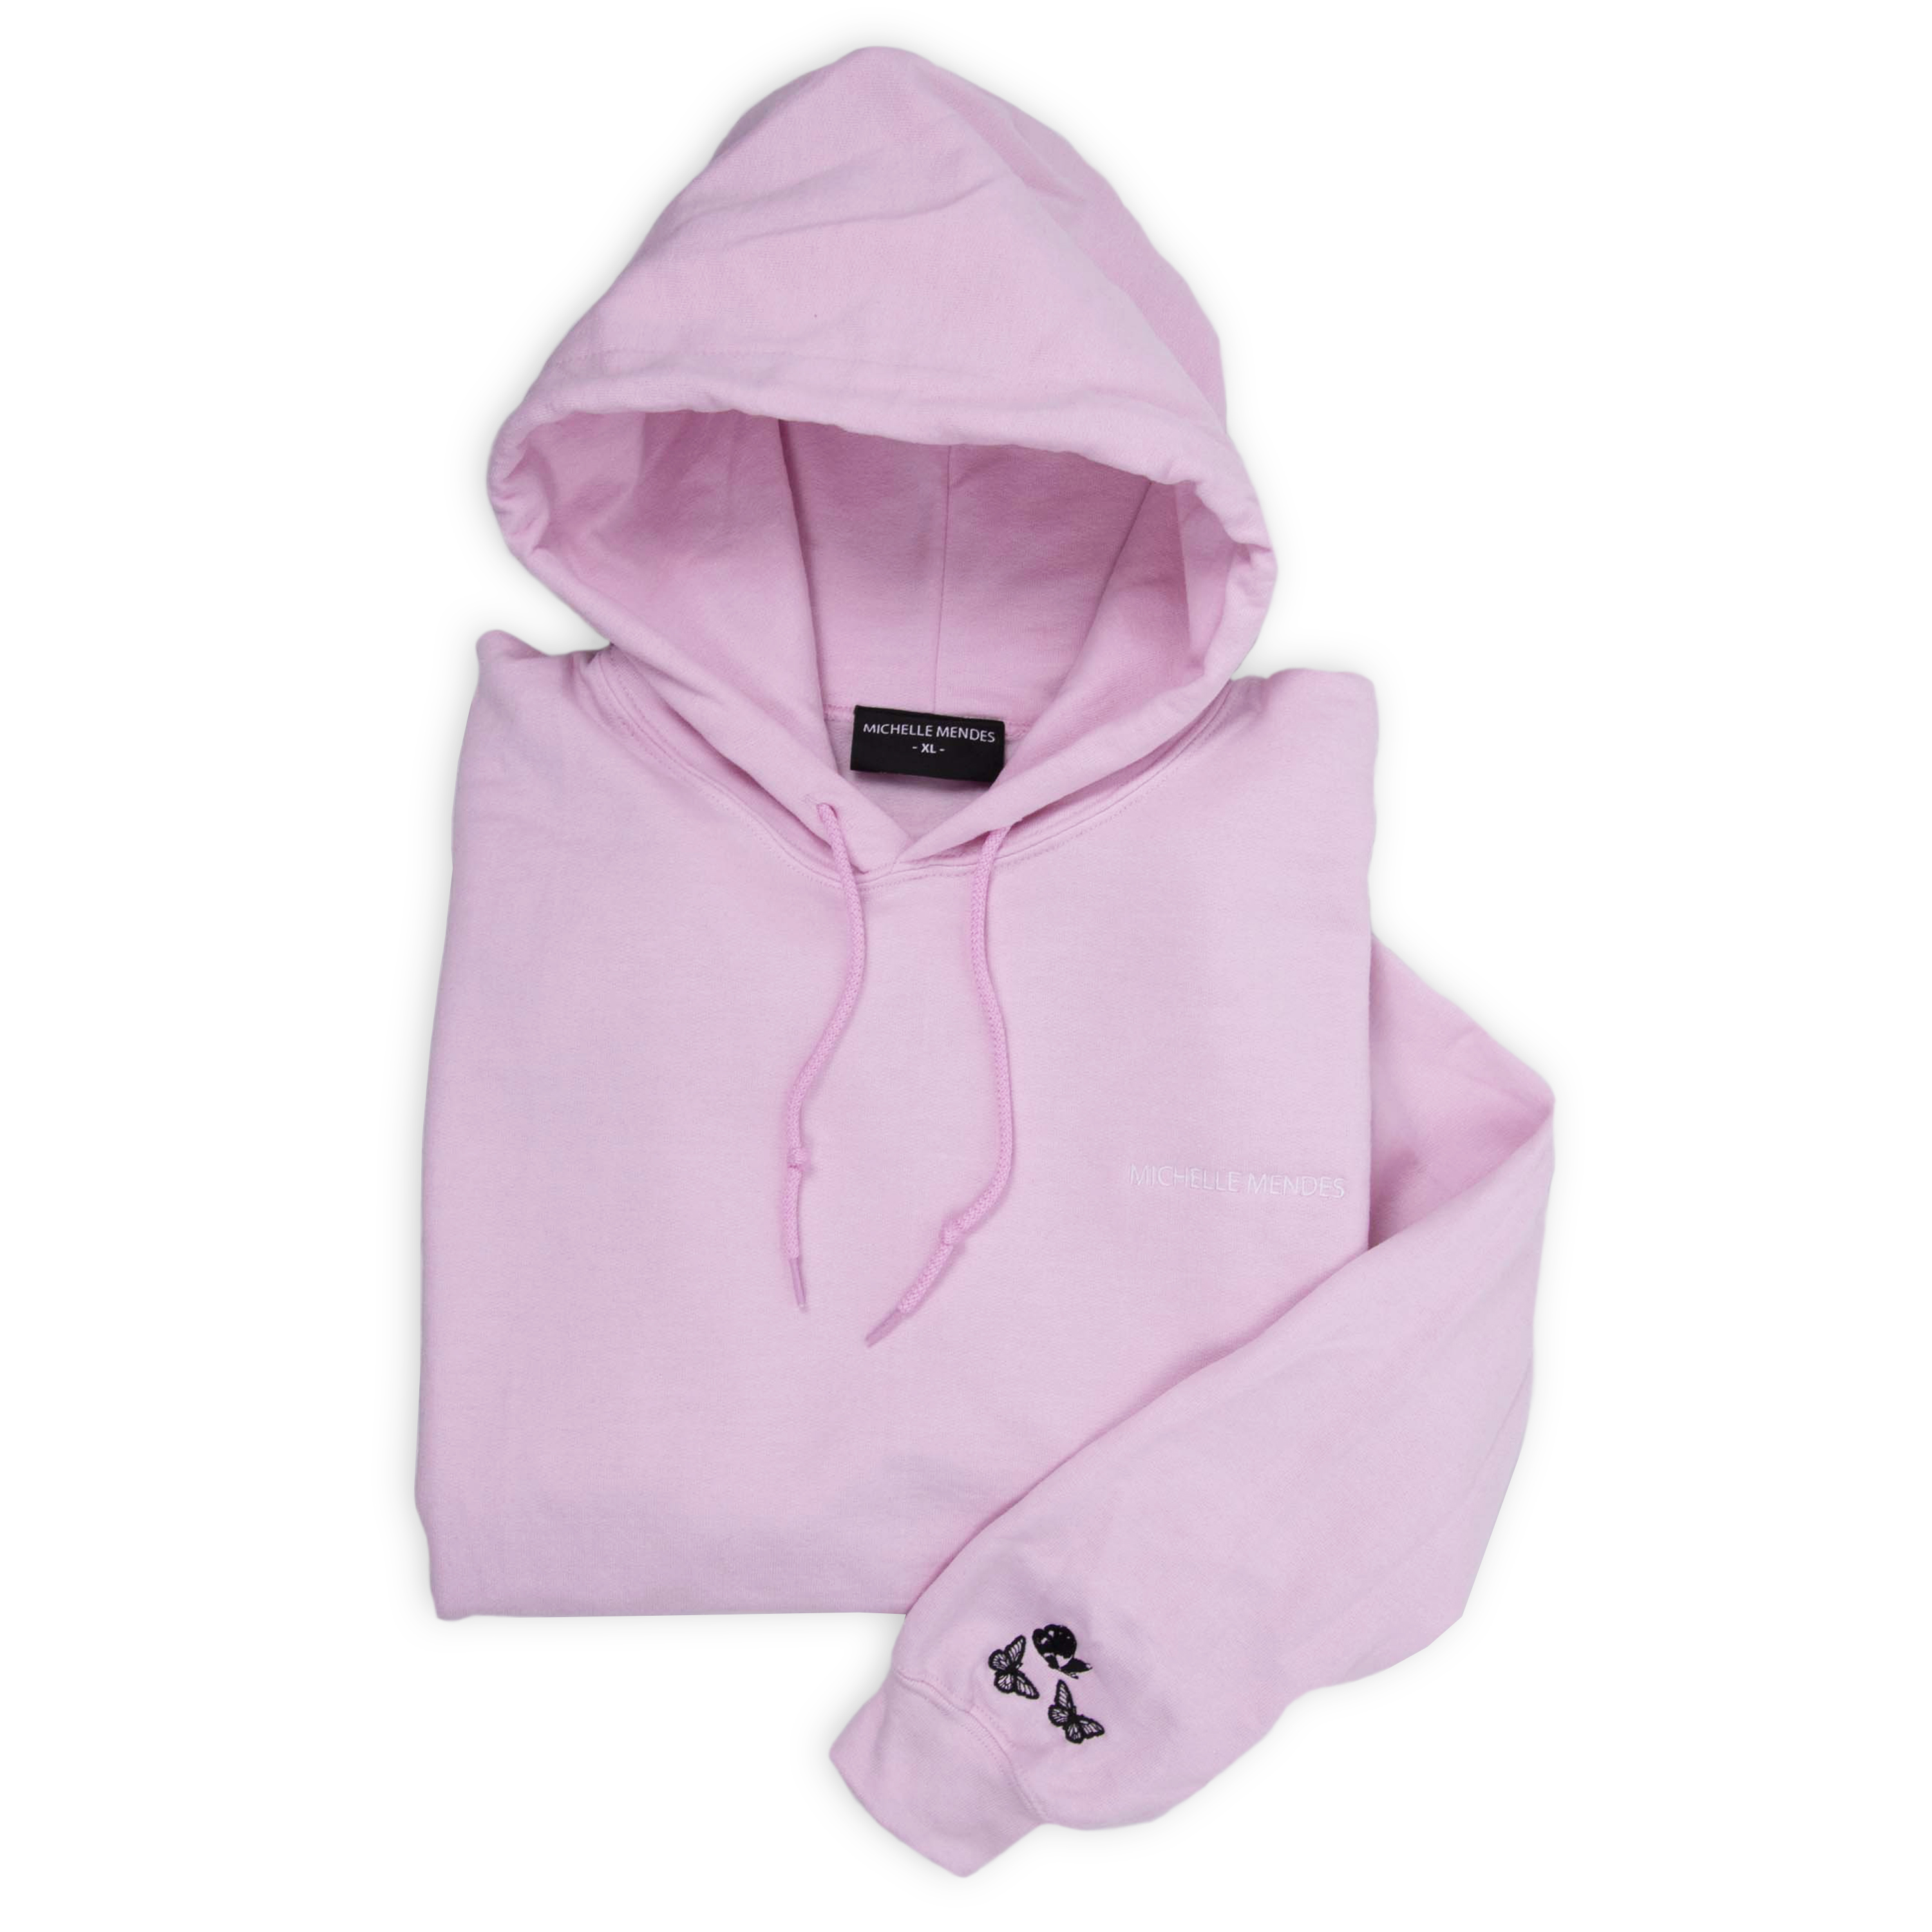 and Schmetterling | | | Textiles Rosa Hoodie Hoodies Fashion Merch